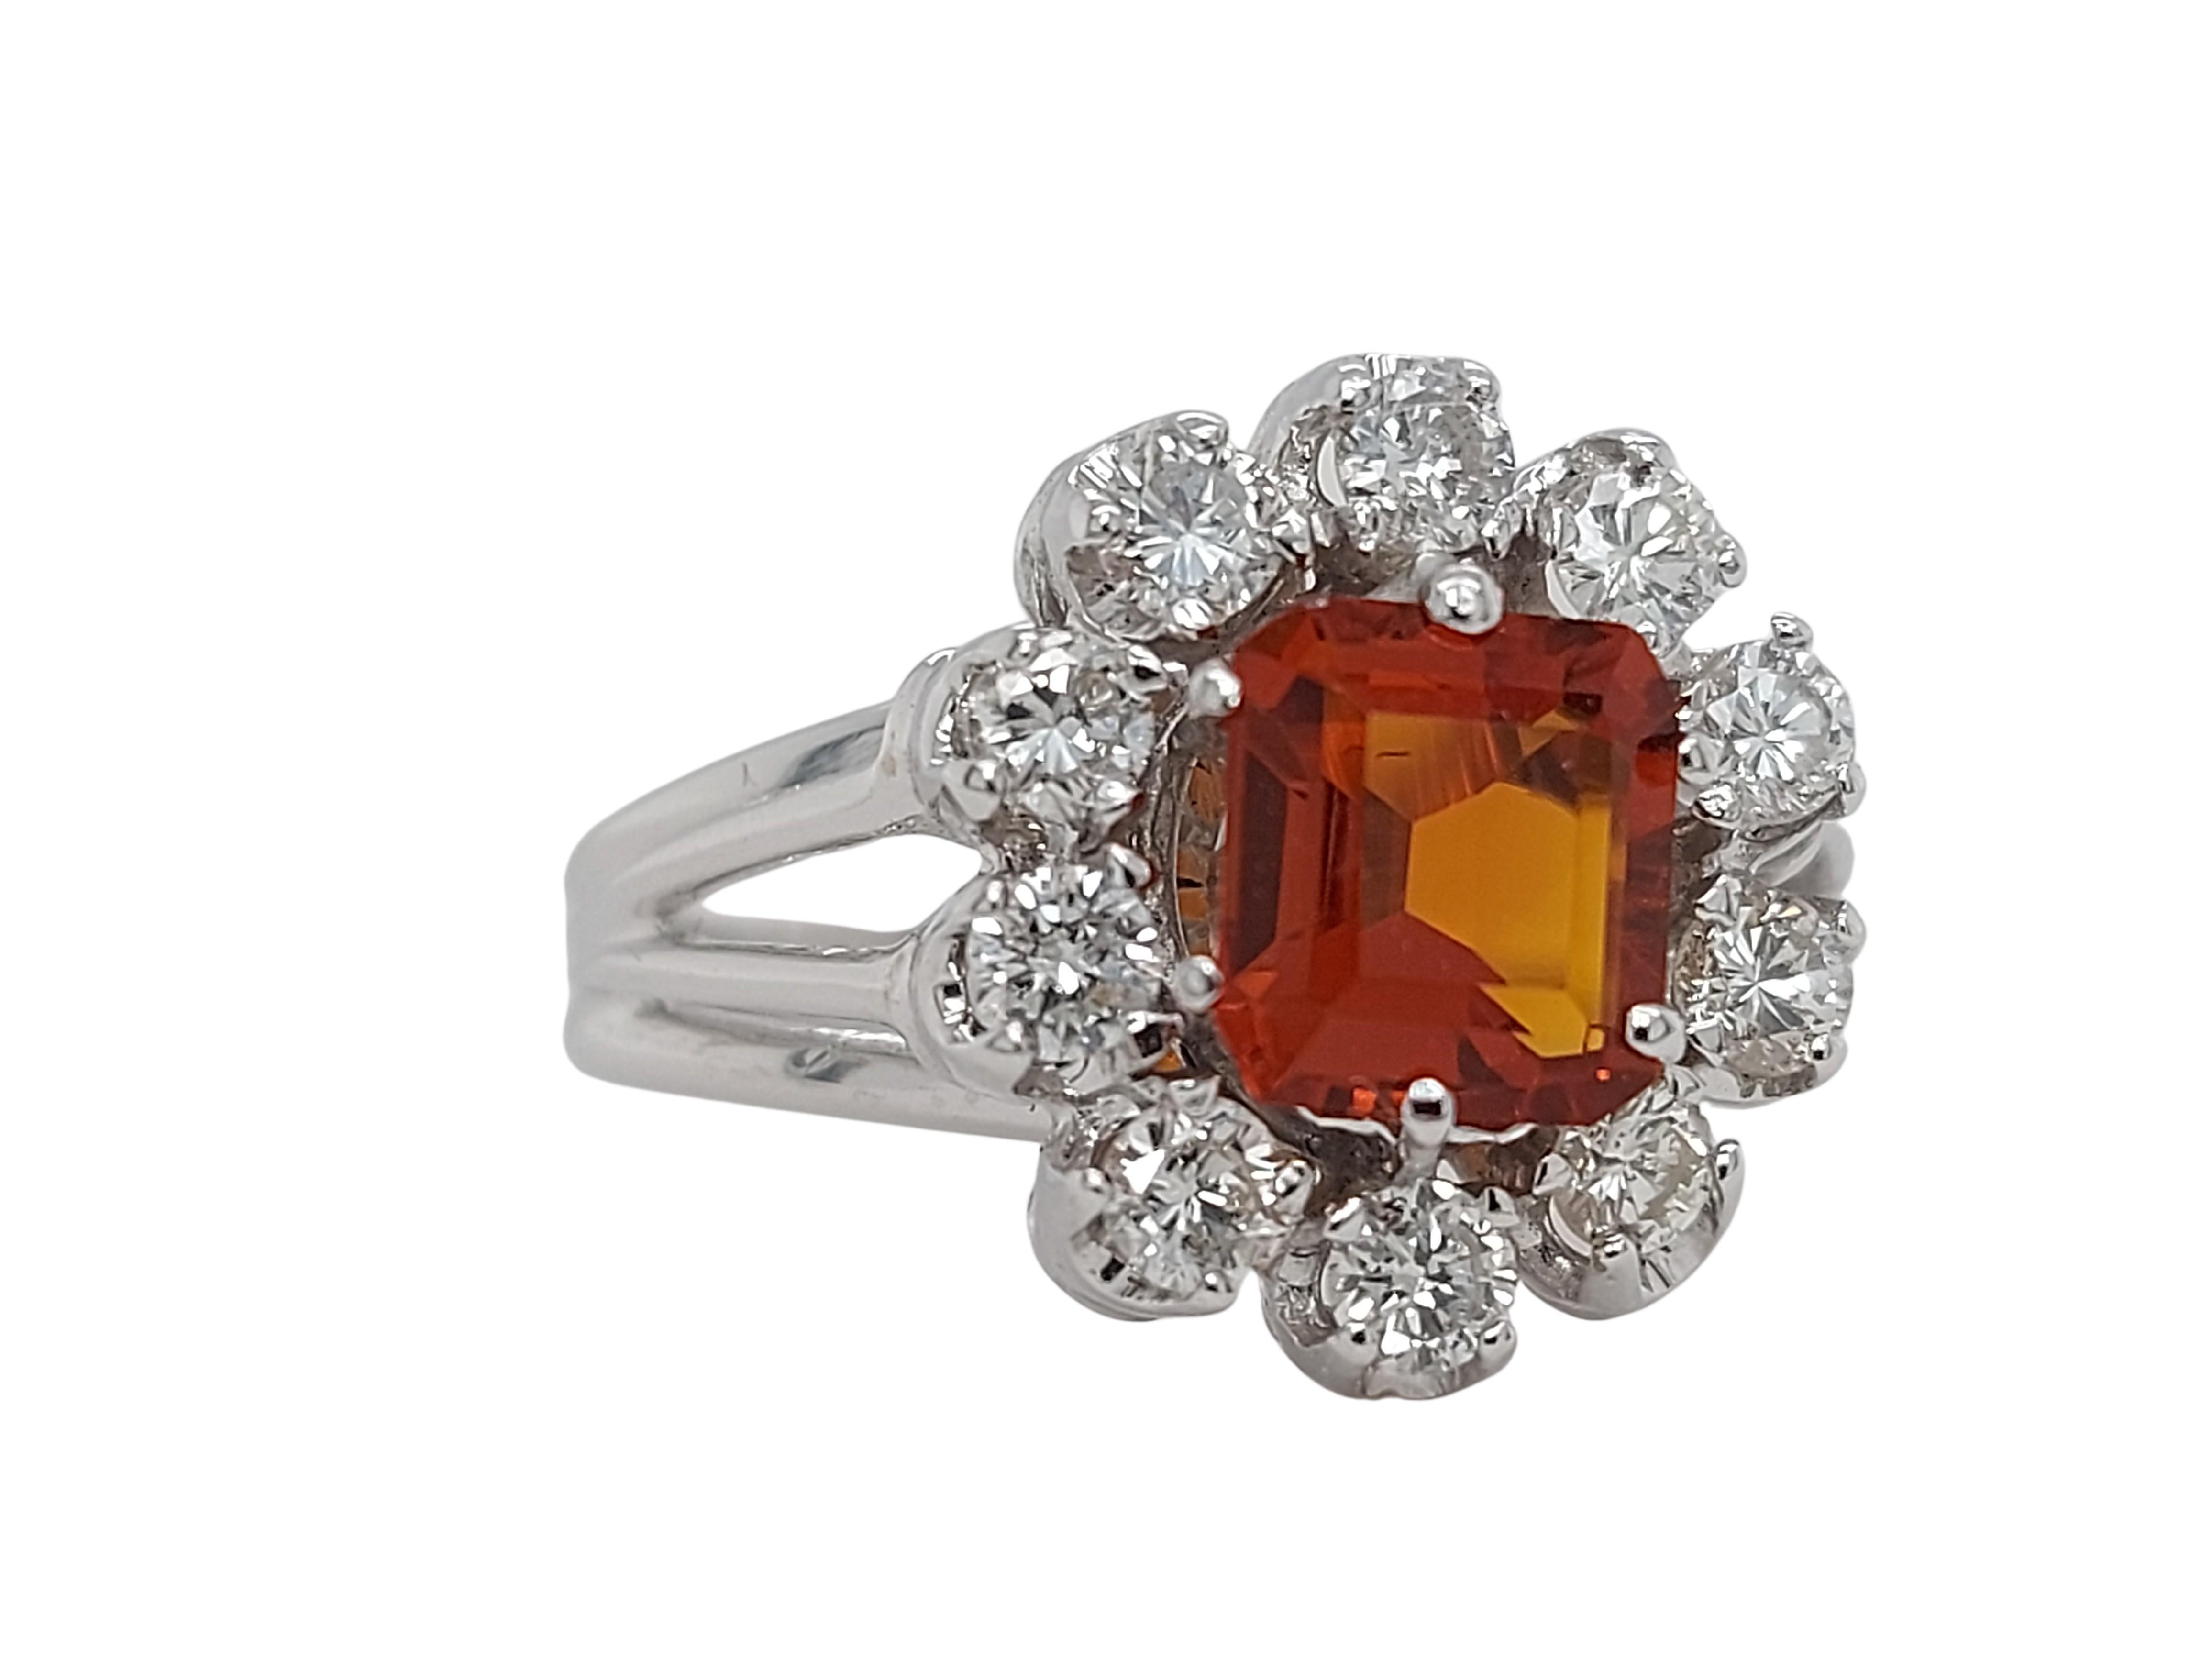 Artisan Stunning Ring with a Big Citrine Stone Surrounded by Diamonds For Sale